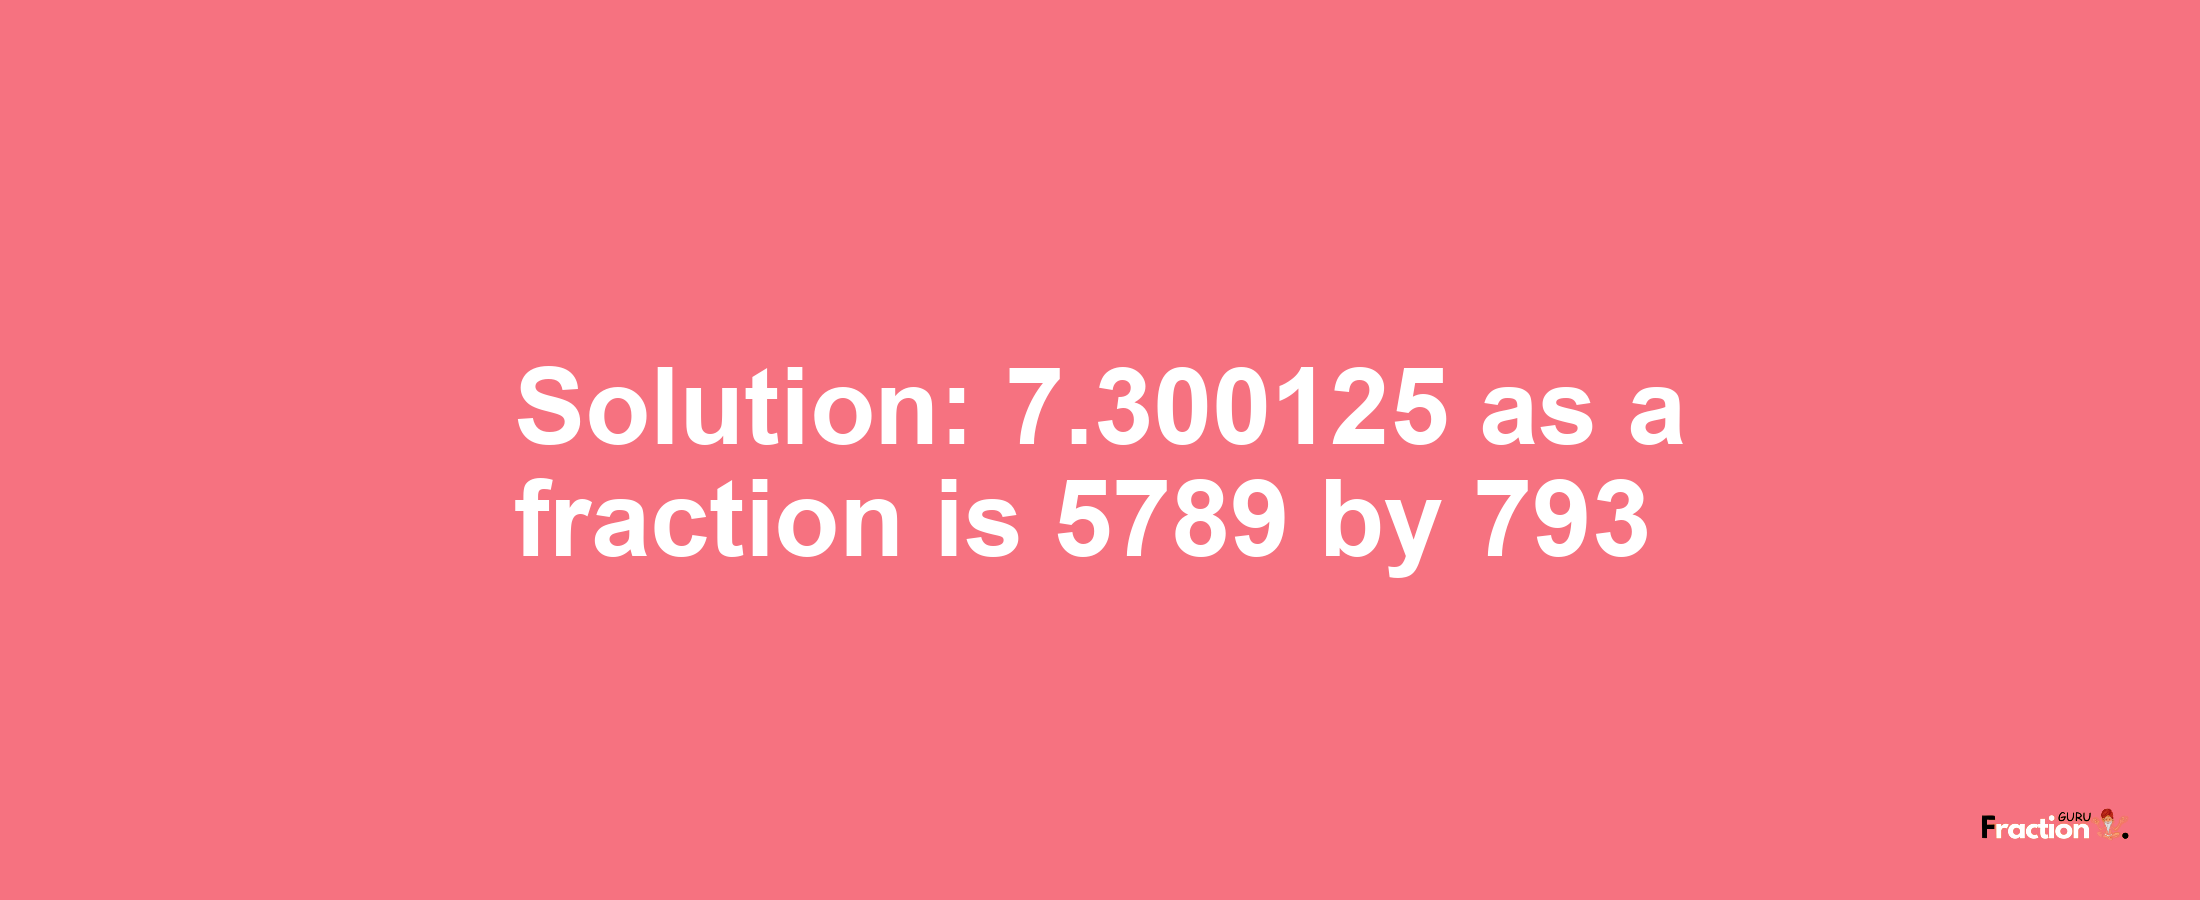 Solution:7.300125 as a fraction is 5789/793